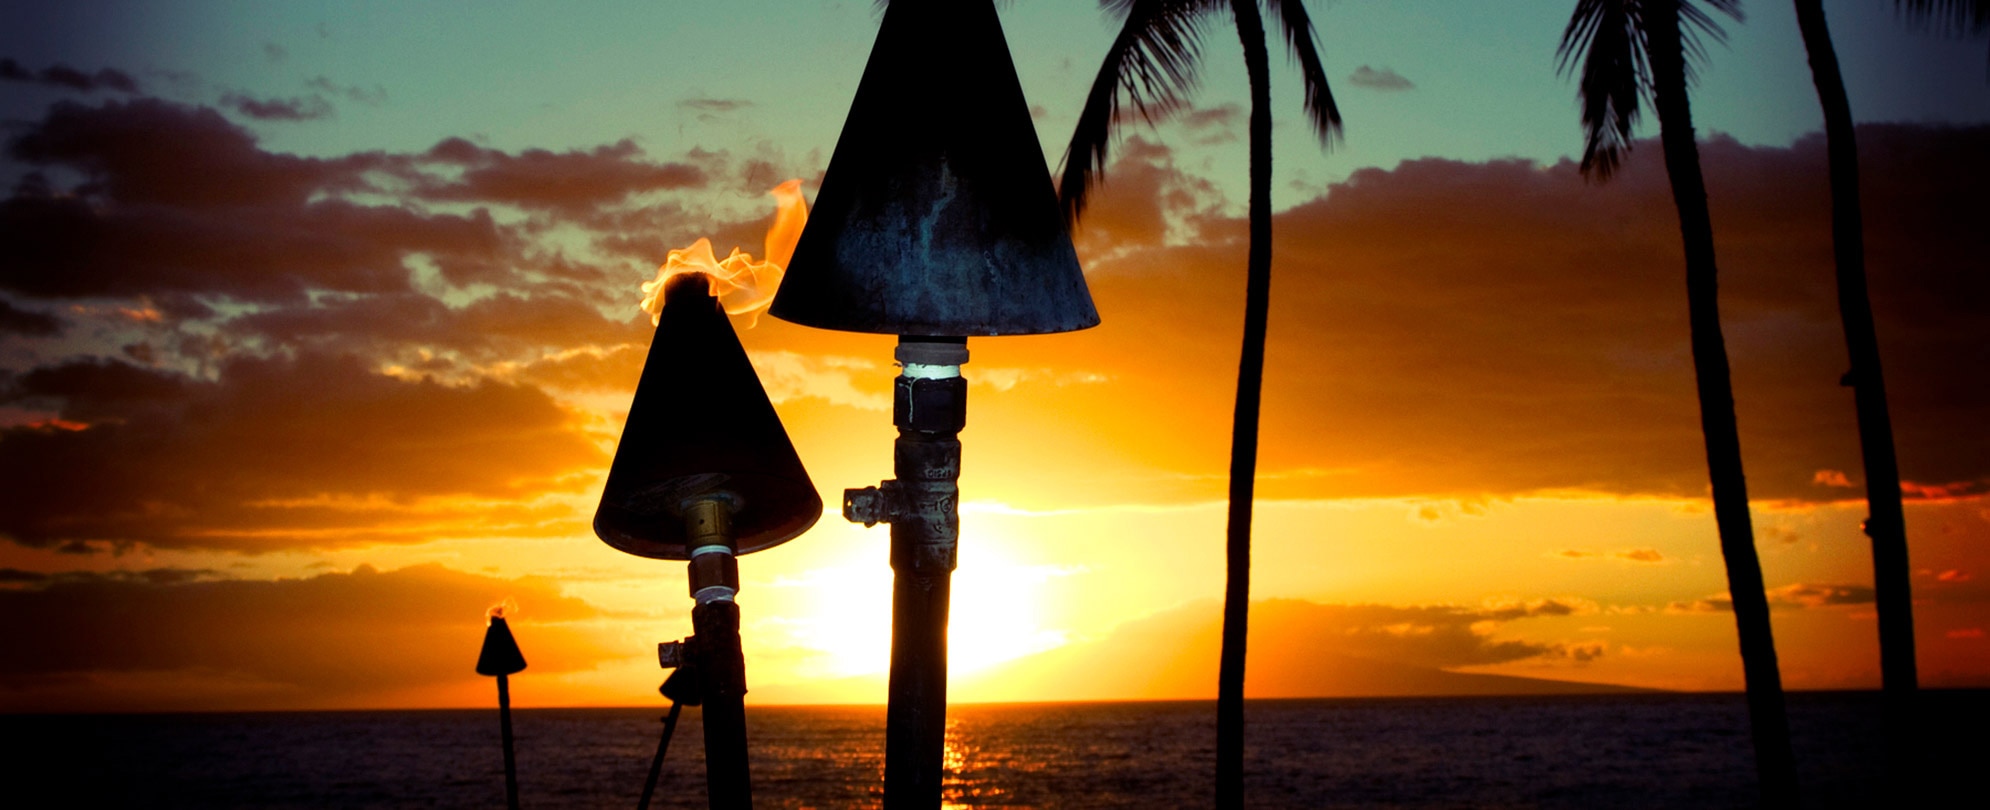 Three tiki torches light up the spooky beach and palm trees at sunset in Hawaii